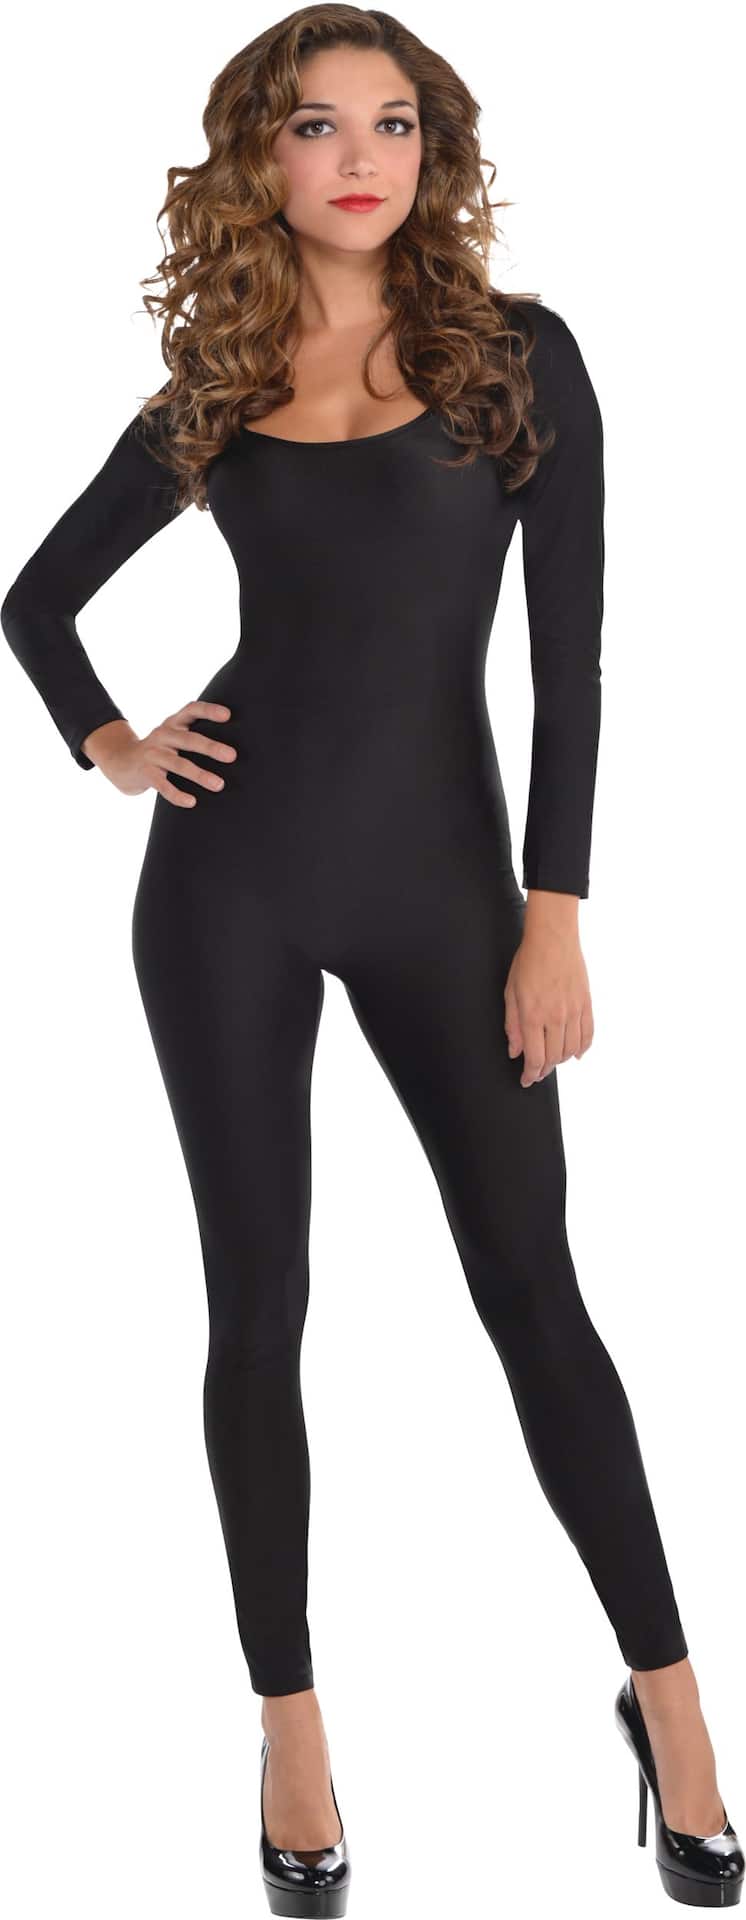 Adult Liquid Spandex Catsuit, Black, Assorted Sizes, Wearable Costume  Accessory for Halloween